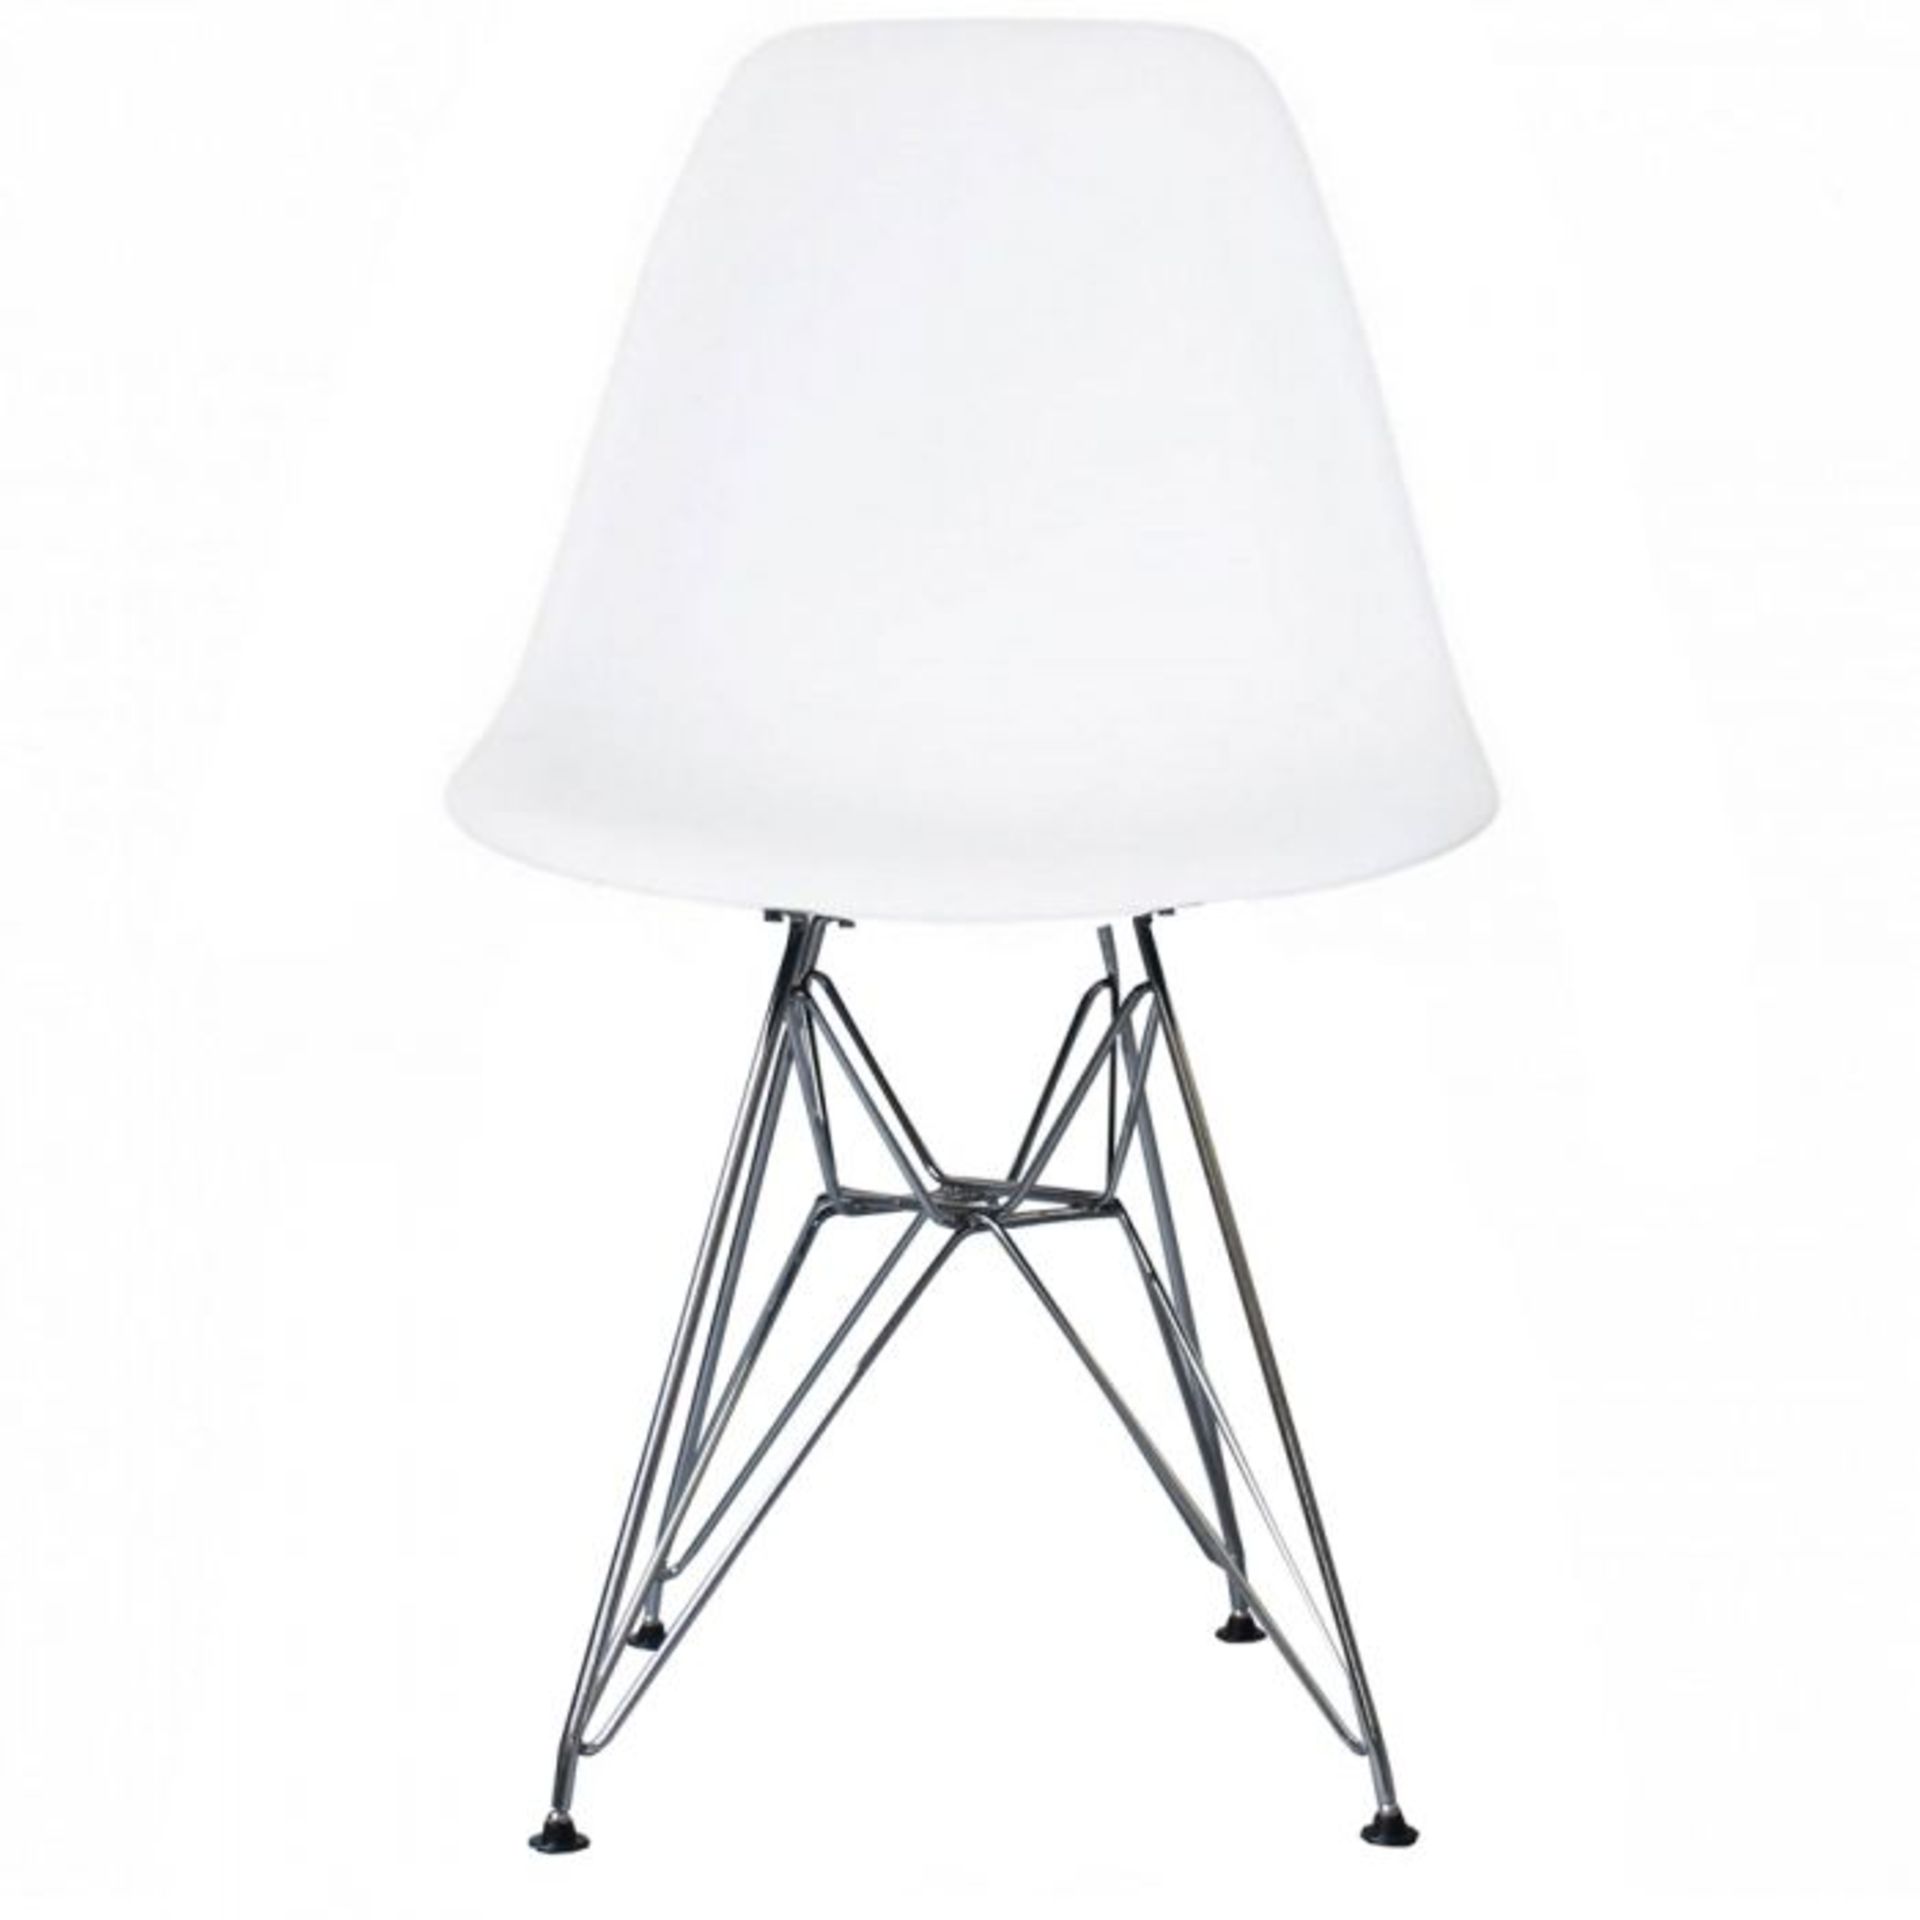 A Set Of 6 x Eames-Style Dining Chairs in White - Includes 2 x Carvers - Image 4 of 6